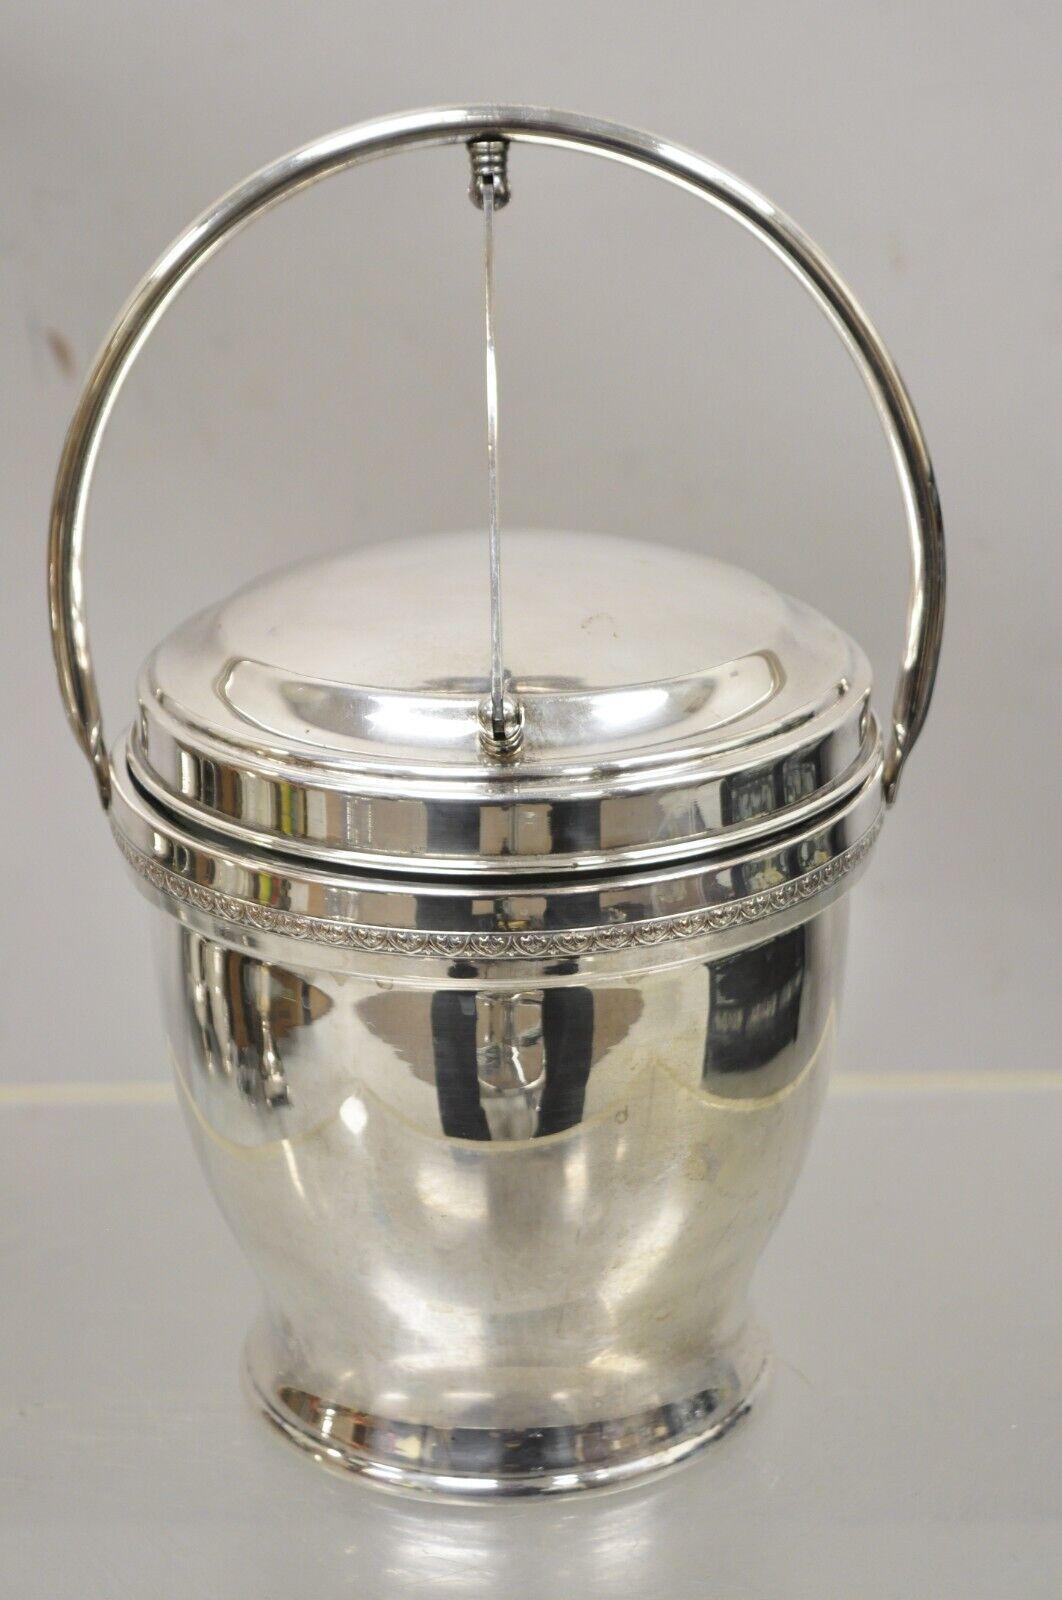 Antique English Regency Silver Plated Ice Bucket with Reticulating Hinge Lid Handle. Item features lion and shield crest to underside, mercury glass lined interior, lifting lid with reticulating swing handle, very nice vintage item, quality